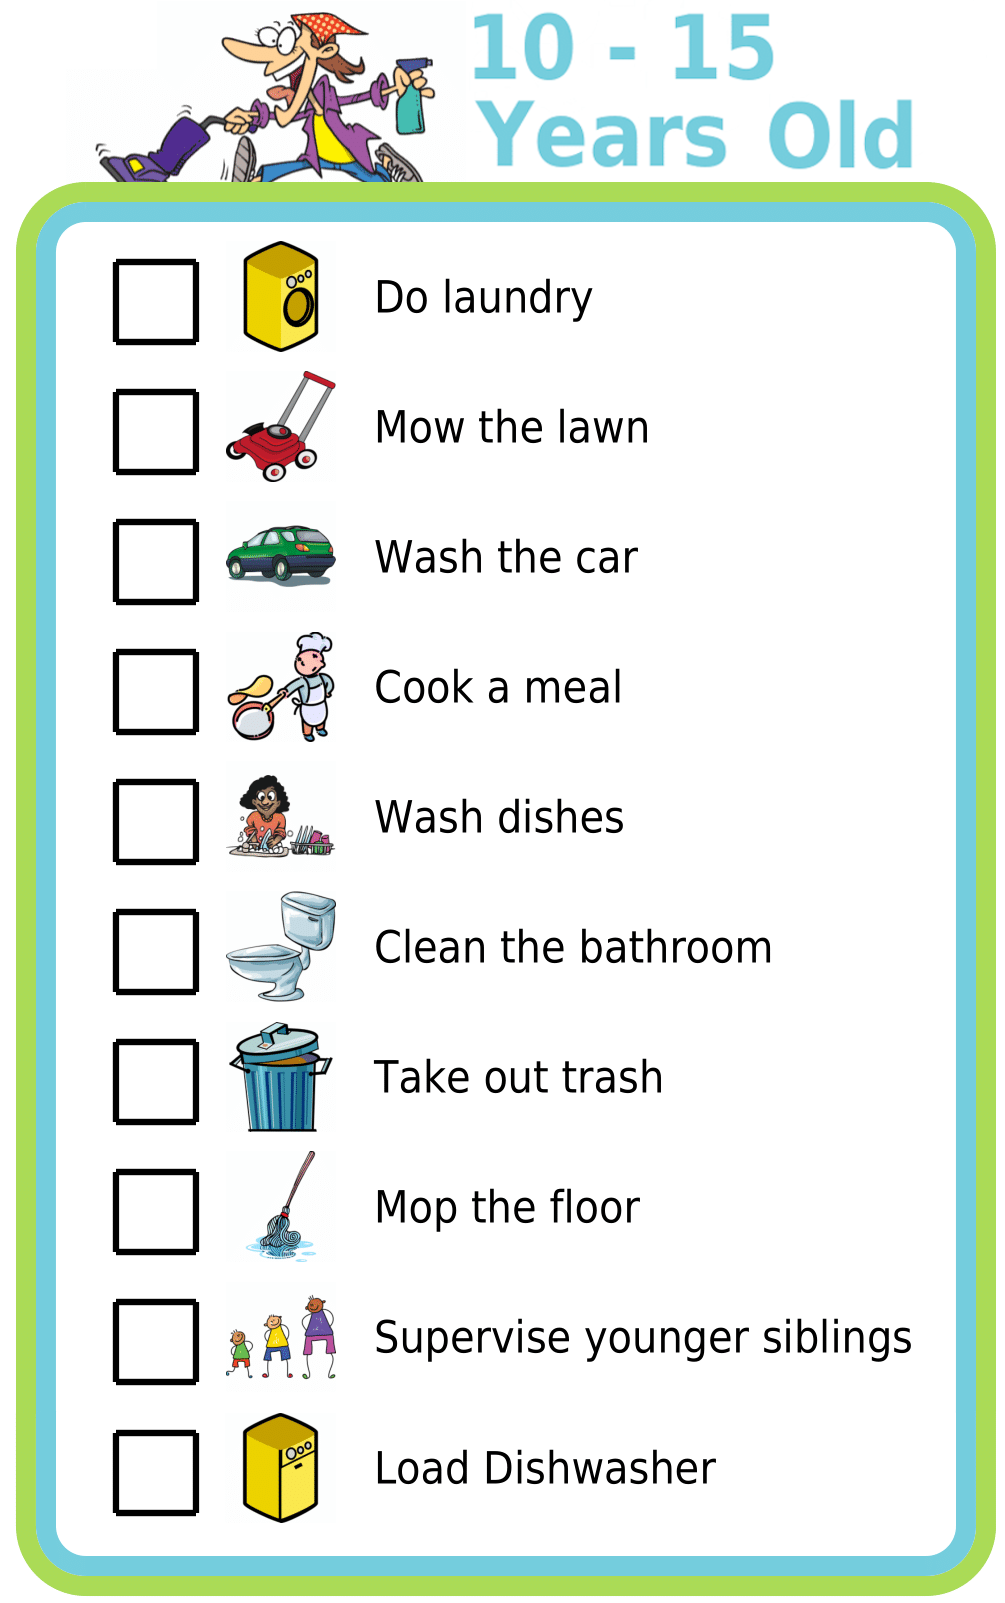 Picture checklist with chores appropriate for ten to fifteen year olds